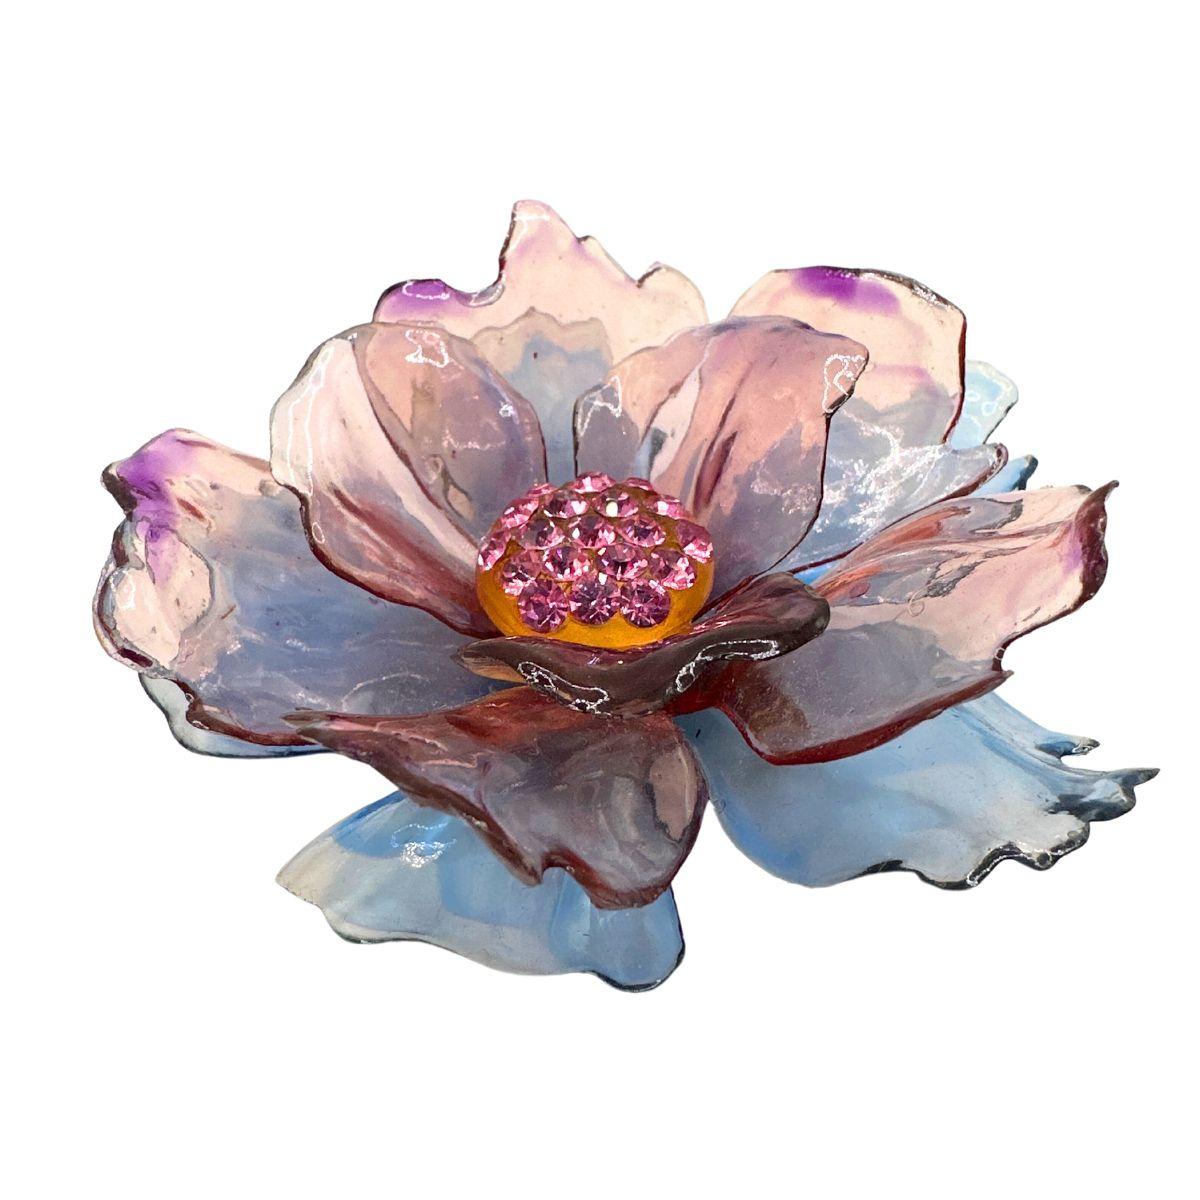 Brooch Diameter: 2.88″

Bin Code: N7 /P13

Step back in time with this breathtaking Antique Beautiful Lucite Flower Brooch from the 1800s. Crafted with intricate details and a touch of vintage elegance, this brooch is a true treasure for collectors